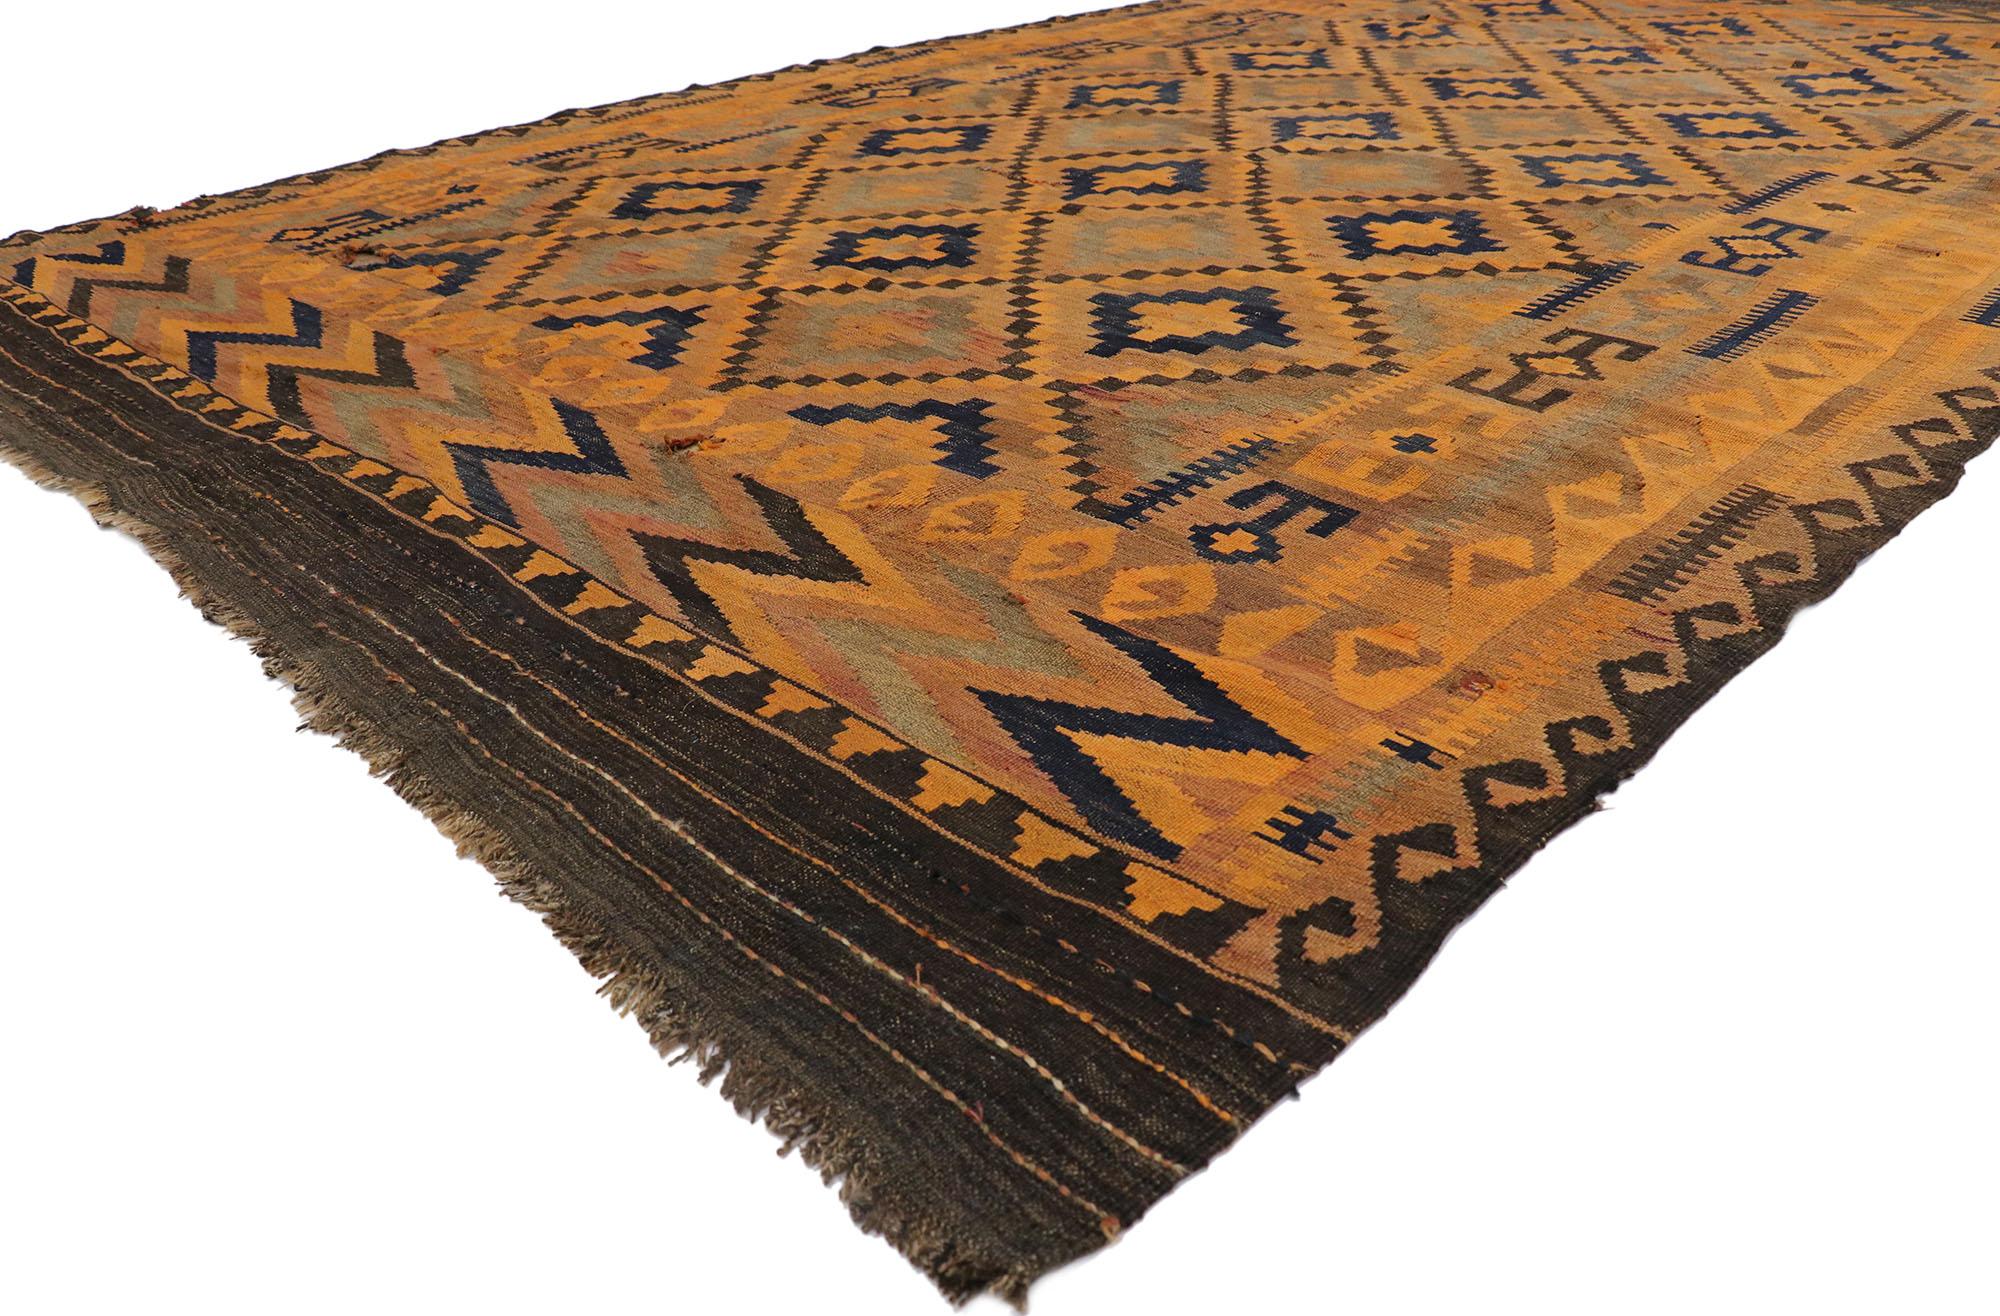 78038 Vintage Afghani Maimana Kilim rug with Mid-Century Modern Style 08'03 x 14'03. Full of tiny details and a bold expressive design combined with vibrant colors and tribal style, this hand-woven wool vintage Afghani Maimana kilim rug is a